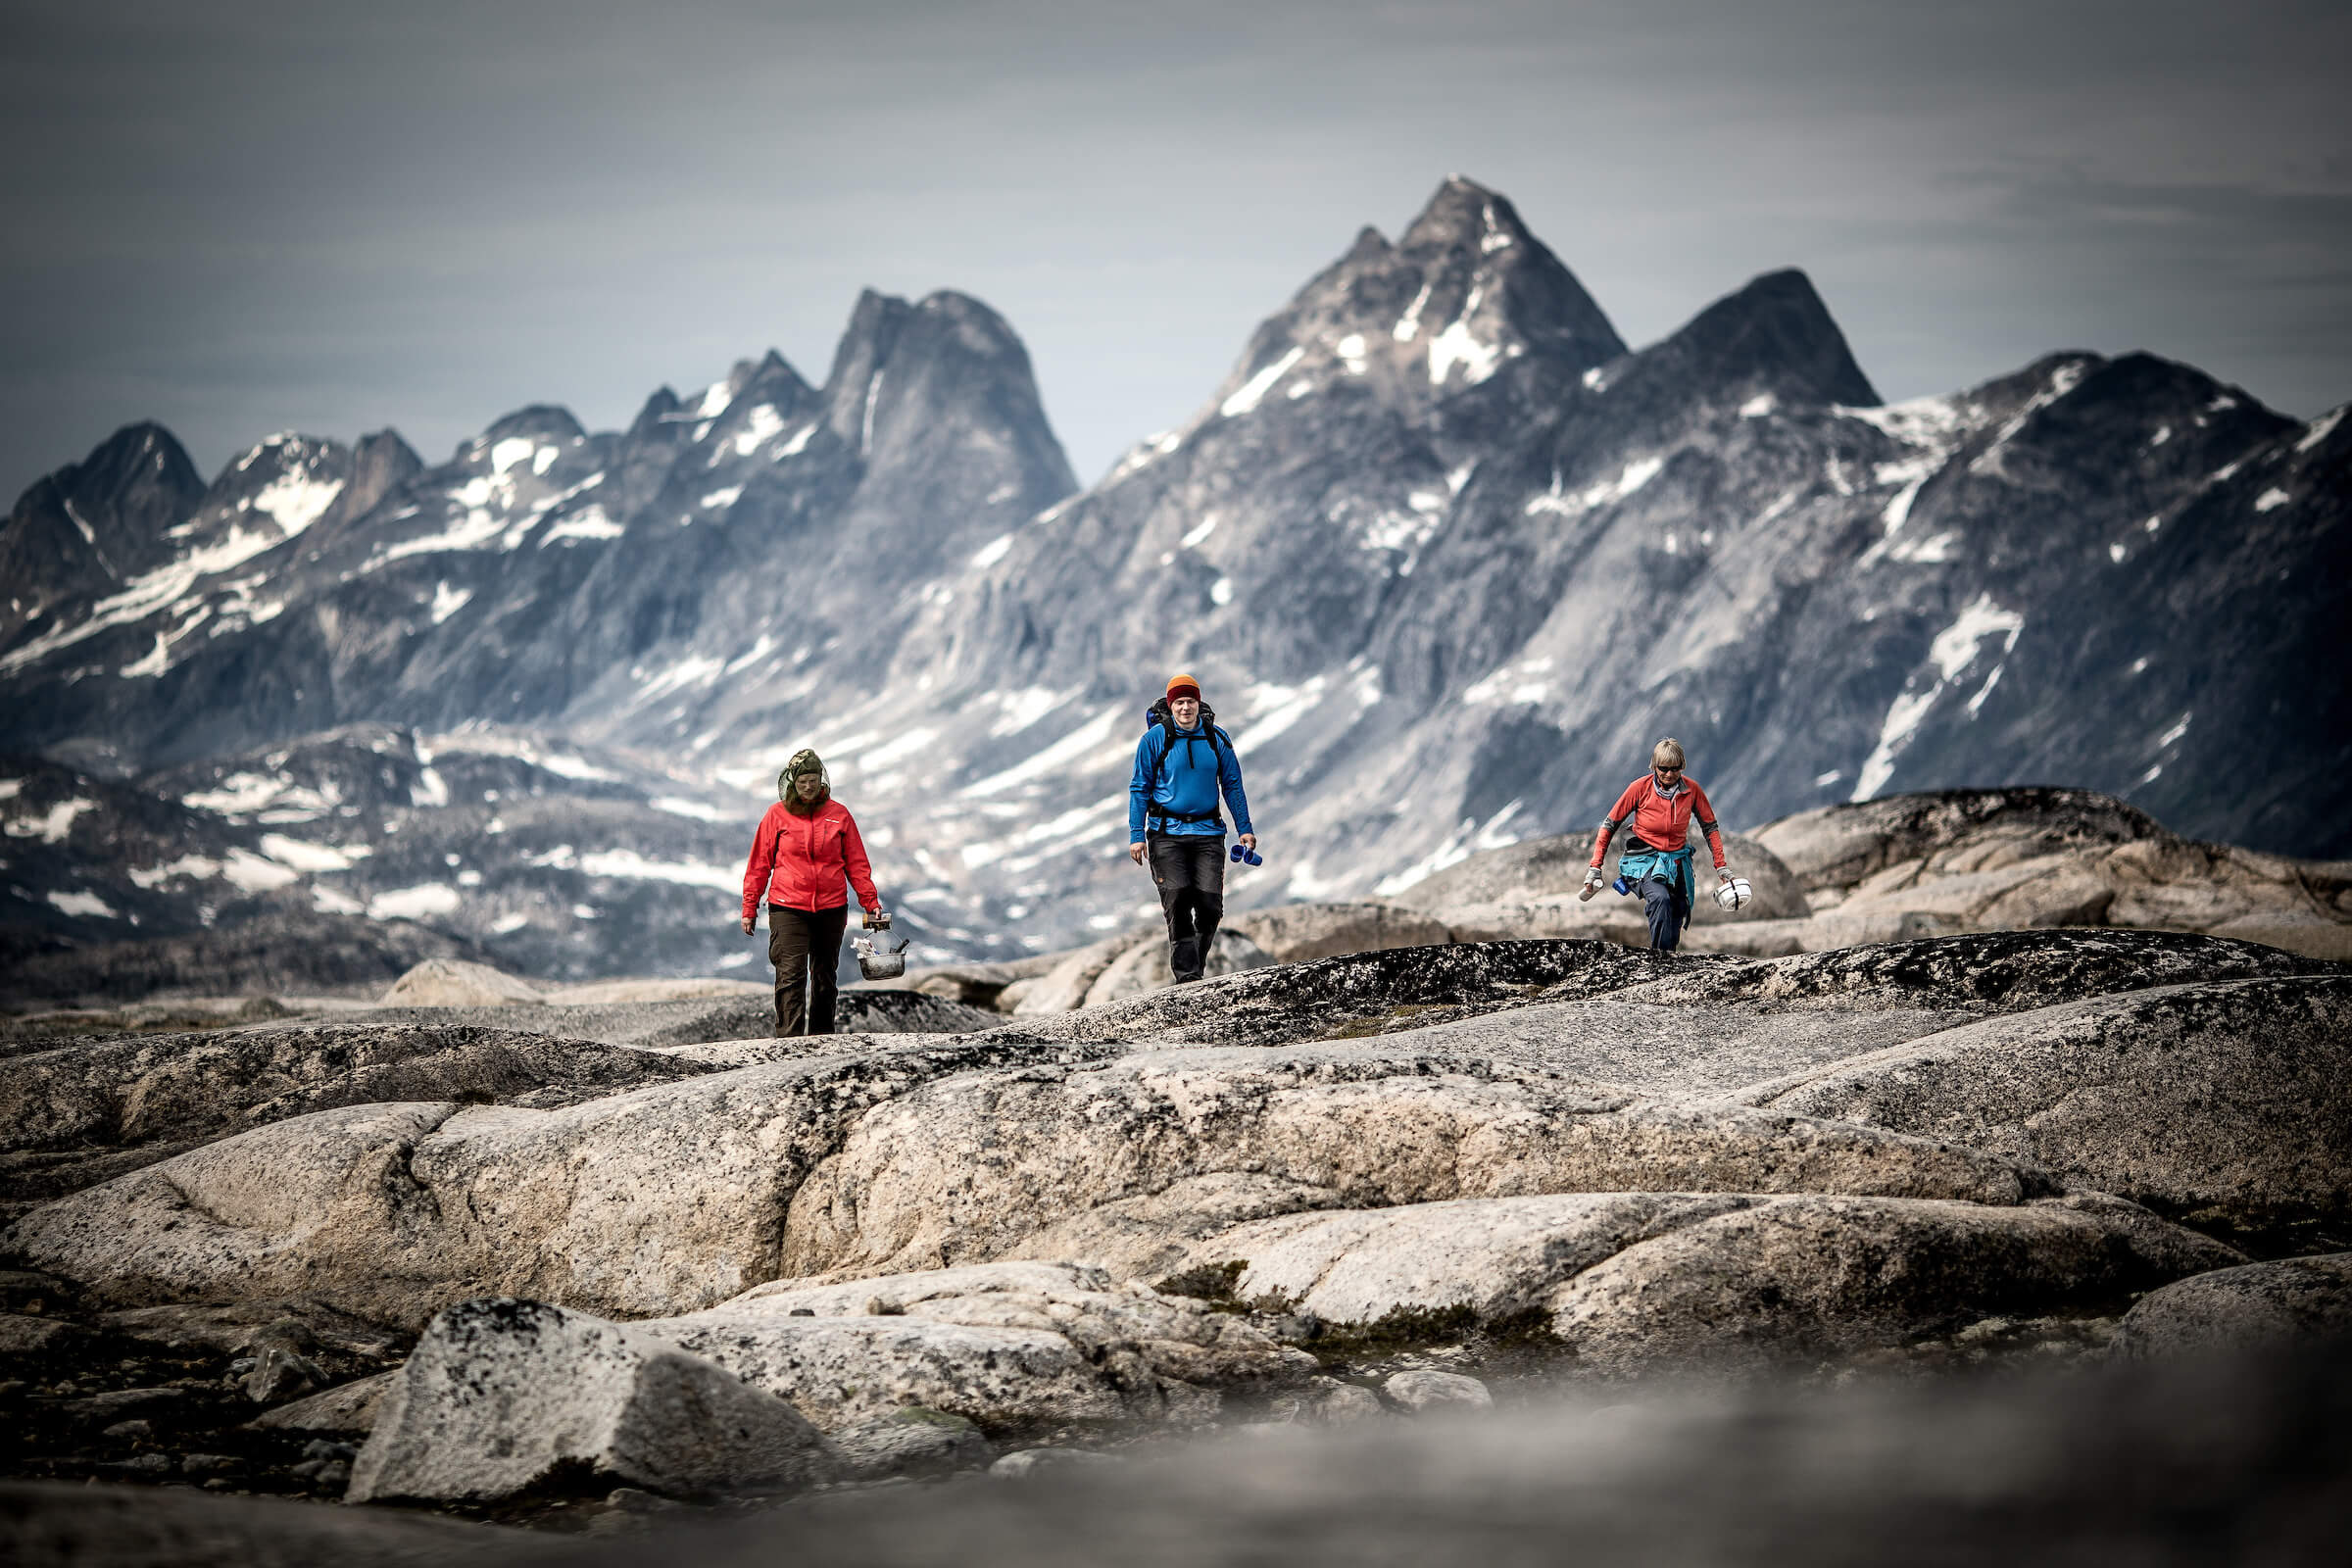 Three hikers in the mountains near Qernertivartivit not far from Kulusuk in East Greenland. Photo by Mads Pihl - Visit Greenland